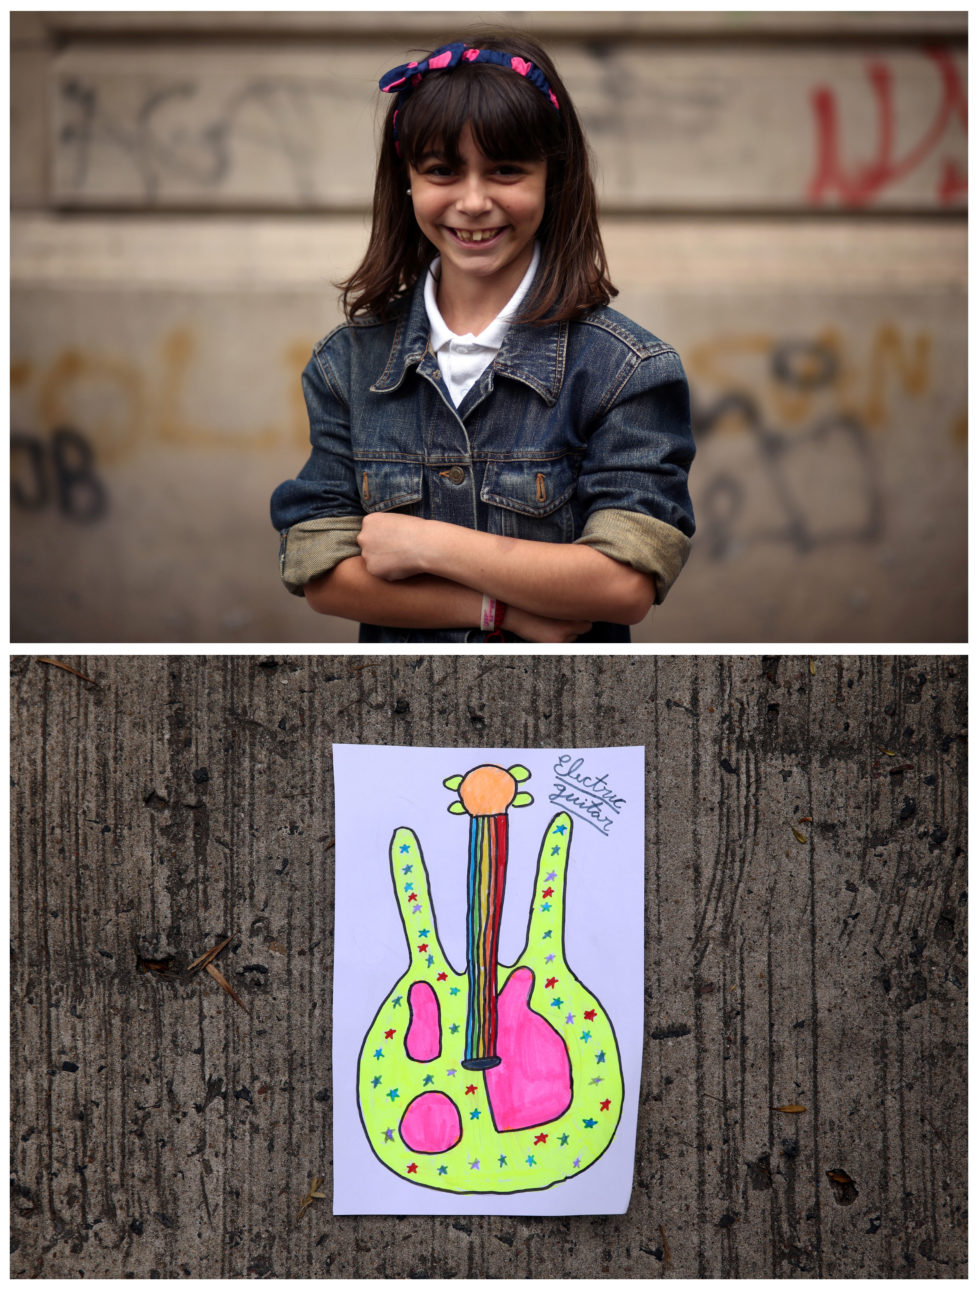 A combination picture shows Morena Fay, 9, posing for a photograph (top) and her drawing of what she wants to get for Christmas from Santa, in Buenos Aires, Argentina, November 16, 2016. "I want to ask Papa Noel (Santa Claus) to bring me an electric guitar this Christmas, because I love music and I've wanted one for a long time," Morena said. Reuters photographers around the world asked children to draw what they wanted to receive from Santa for Christmas. REUTERS/Marcos Brindicci SEARCH "CHRISTMAS WISHES" FOR THIS STORY. SEARCH "WIDER IMAGE" FOR ALL STORIES. - RTSV37B